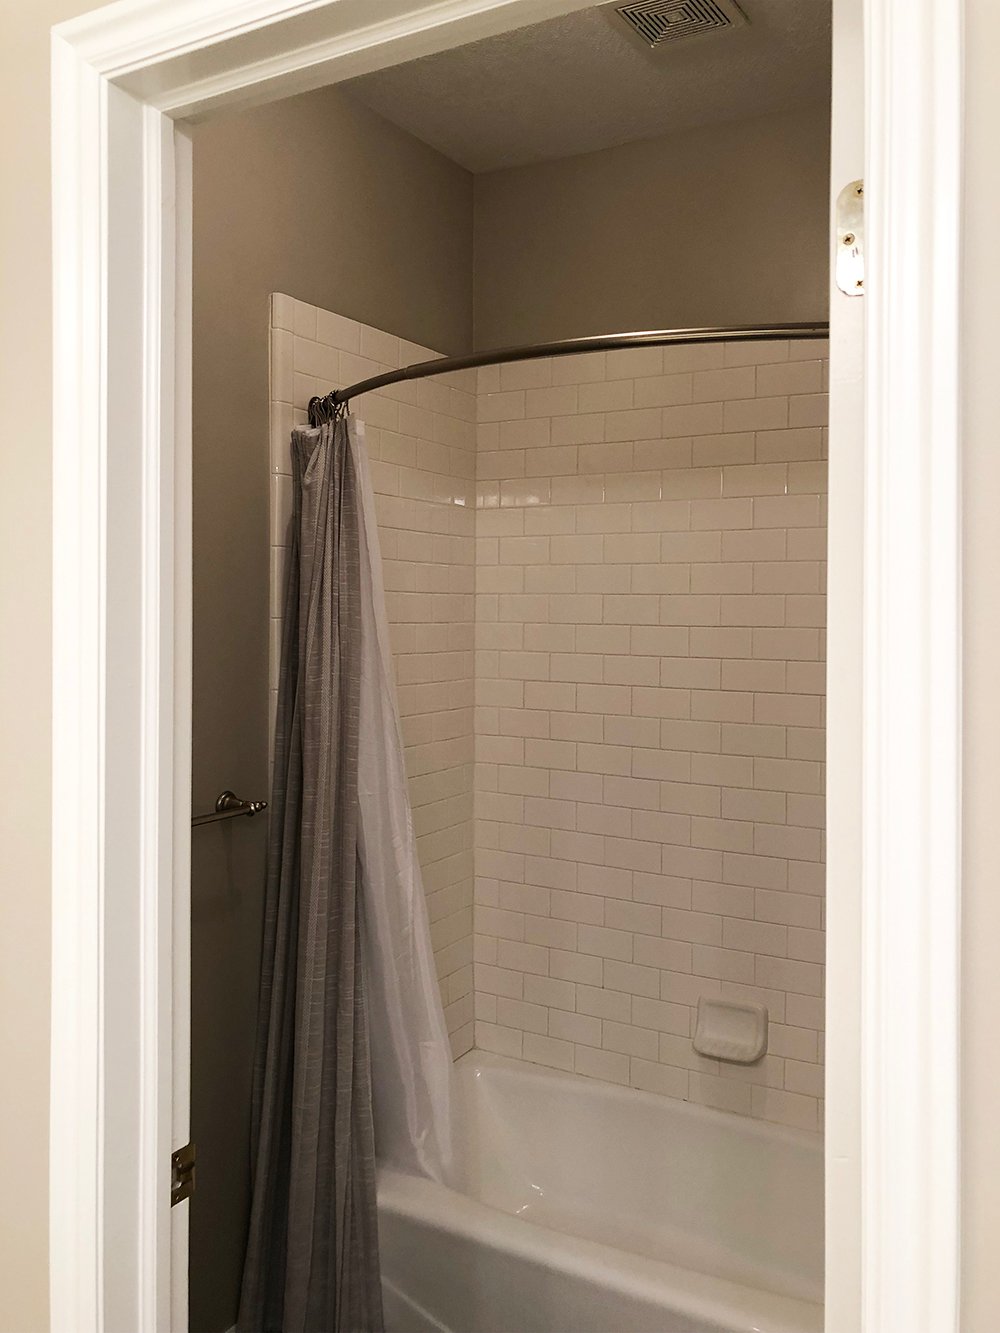 Our Guest Bath Design Plan & Before Images - roomfortuesday.com